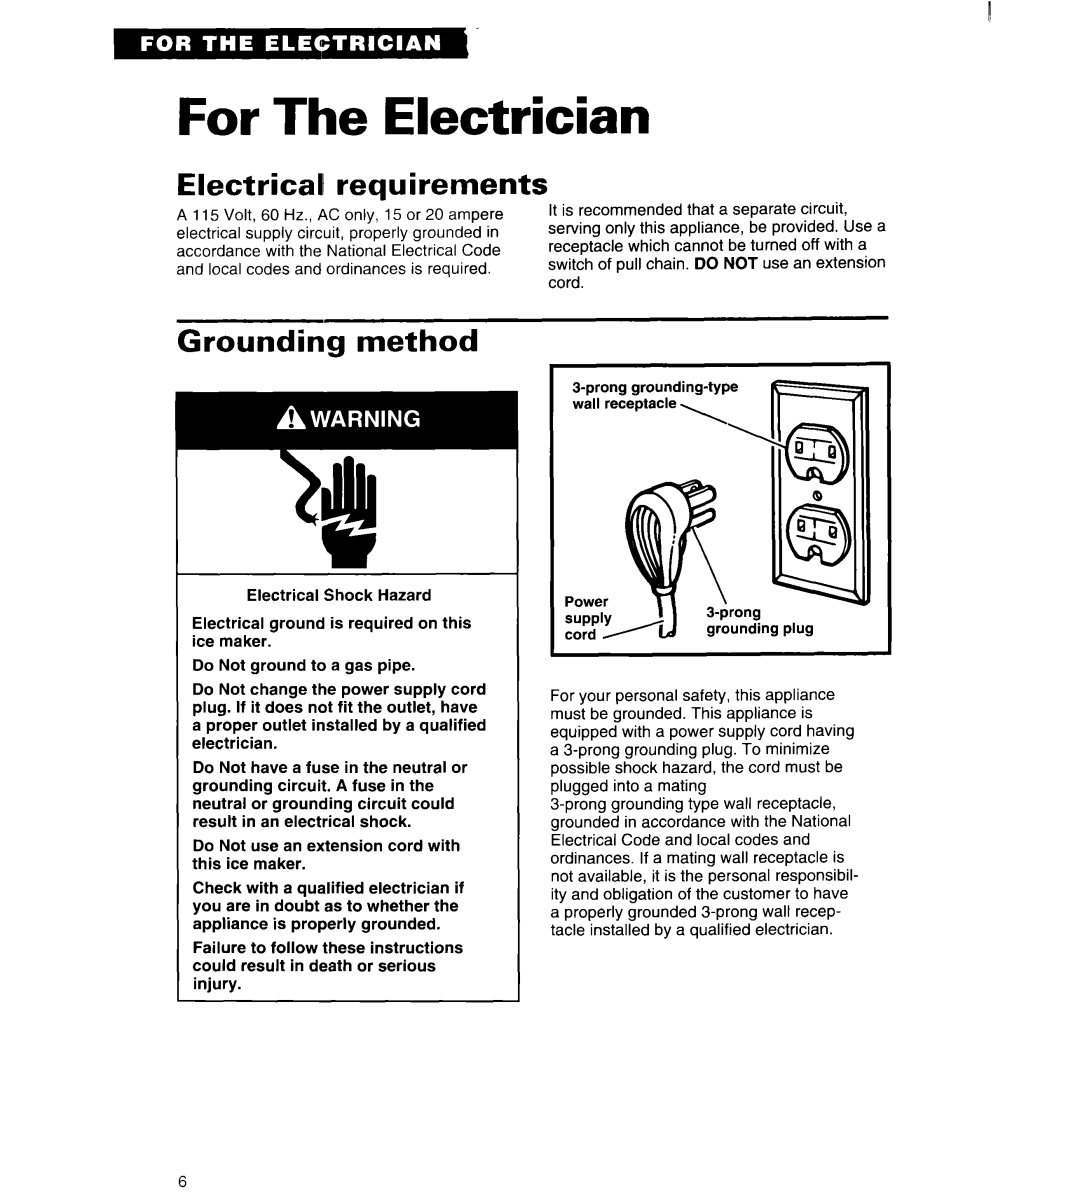 Whirlpool 2180913 manual For The Electrician, Electrical1 requirements, Grounding method 